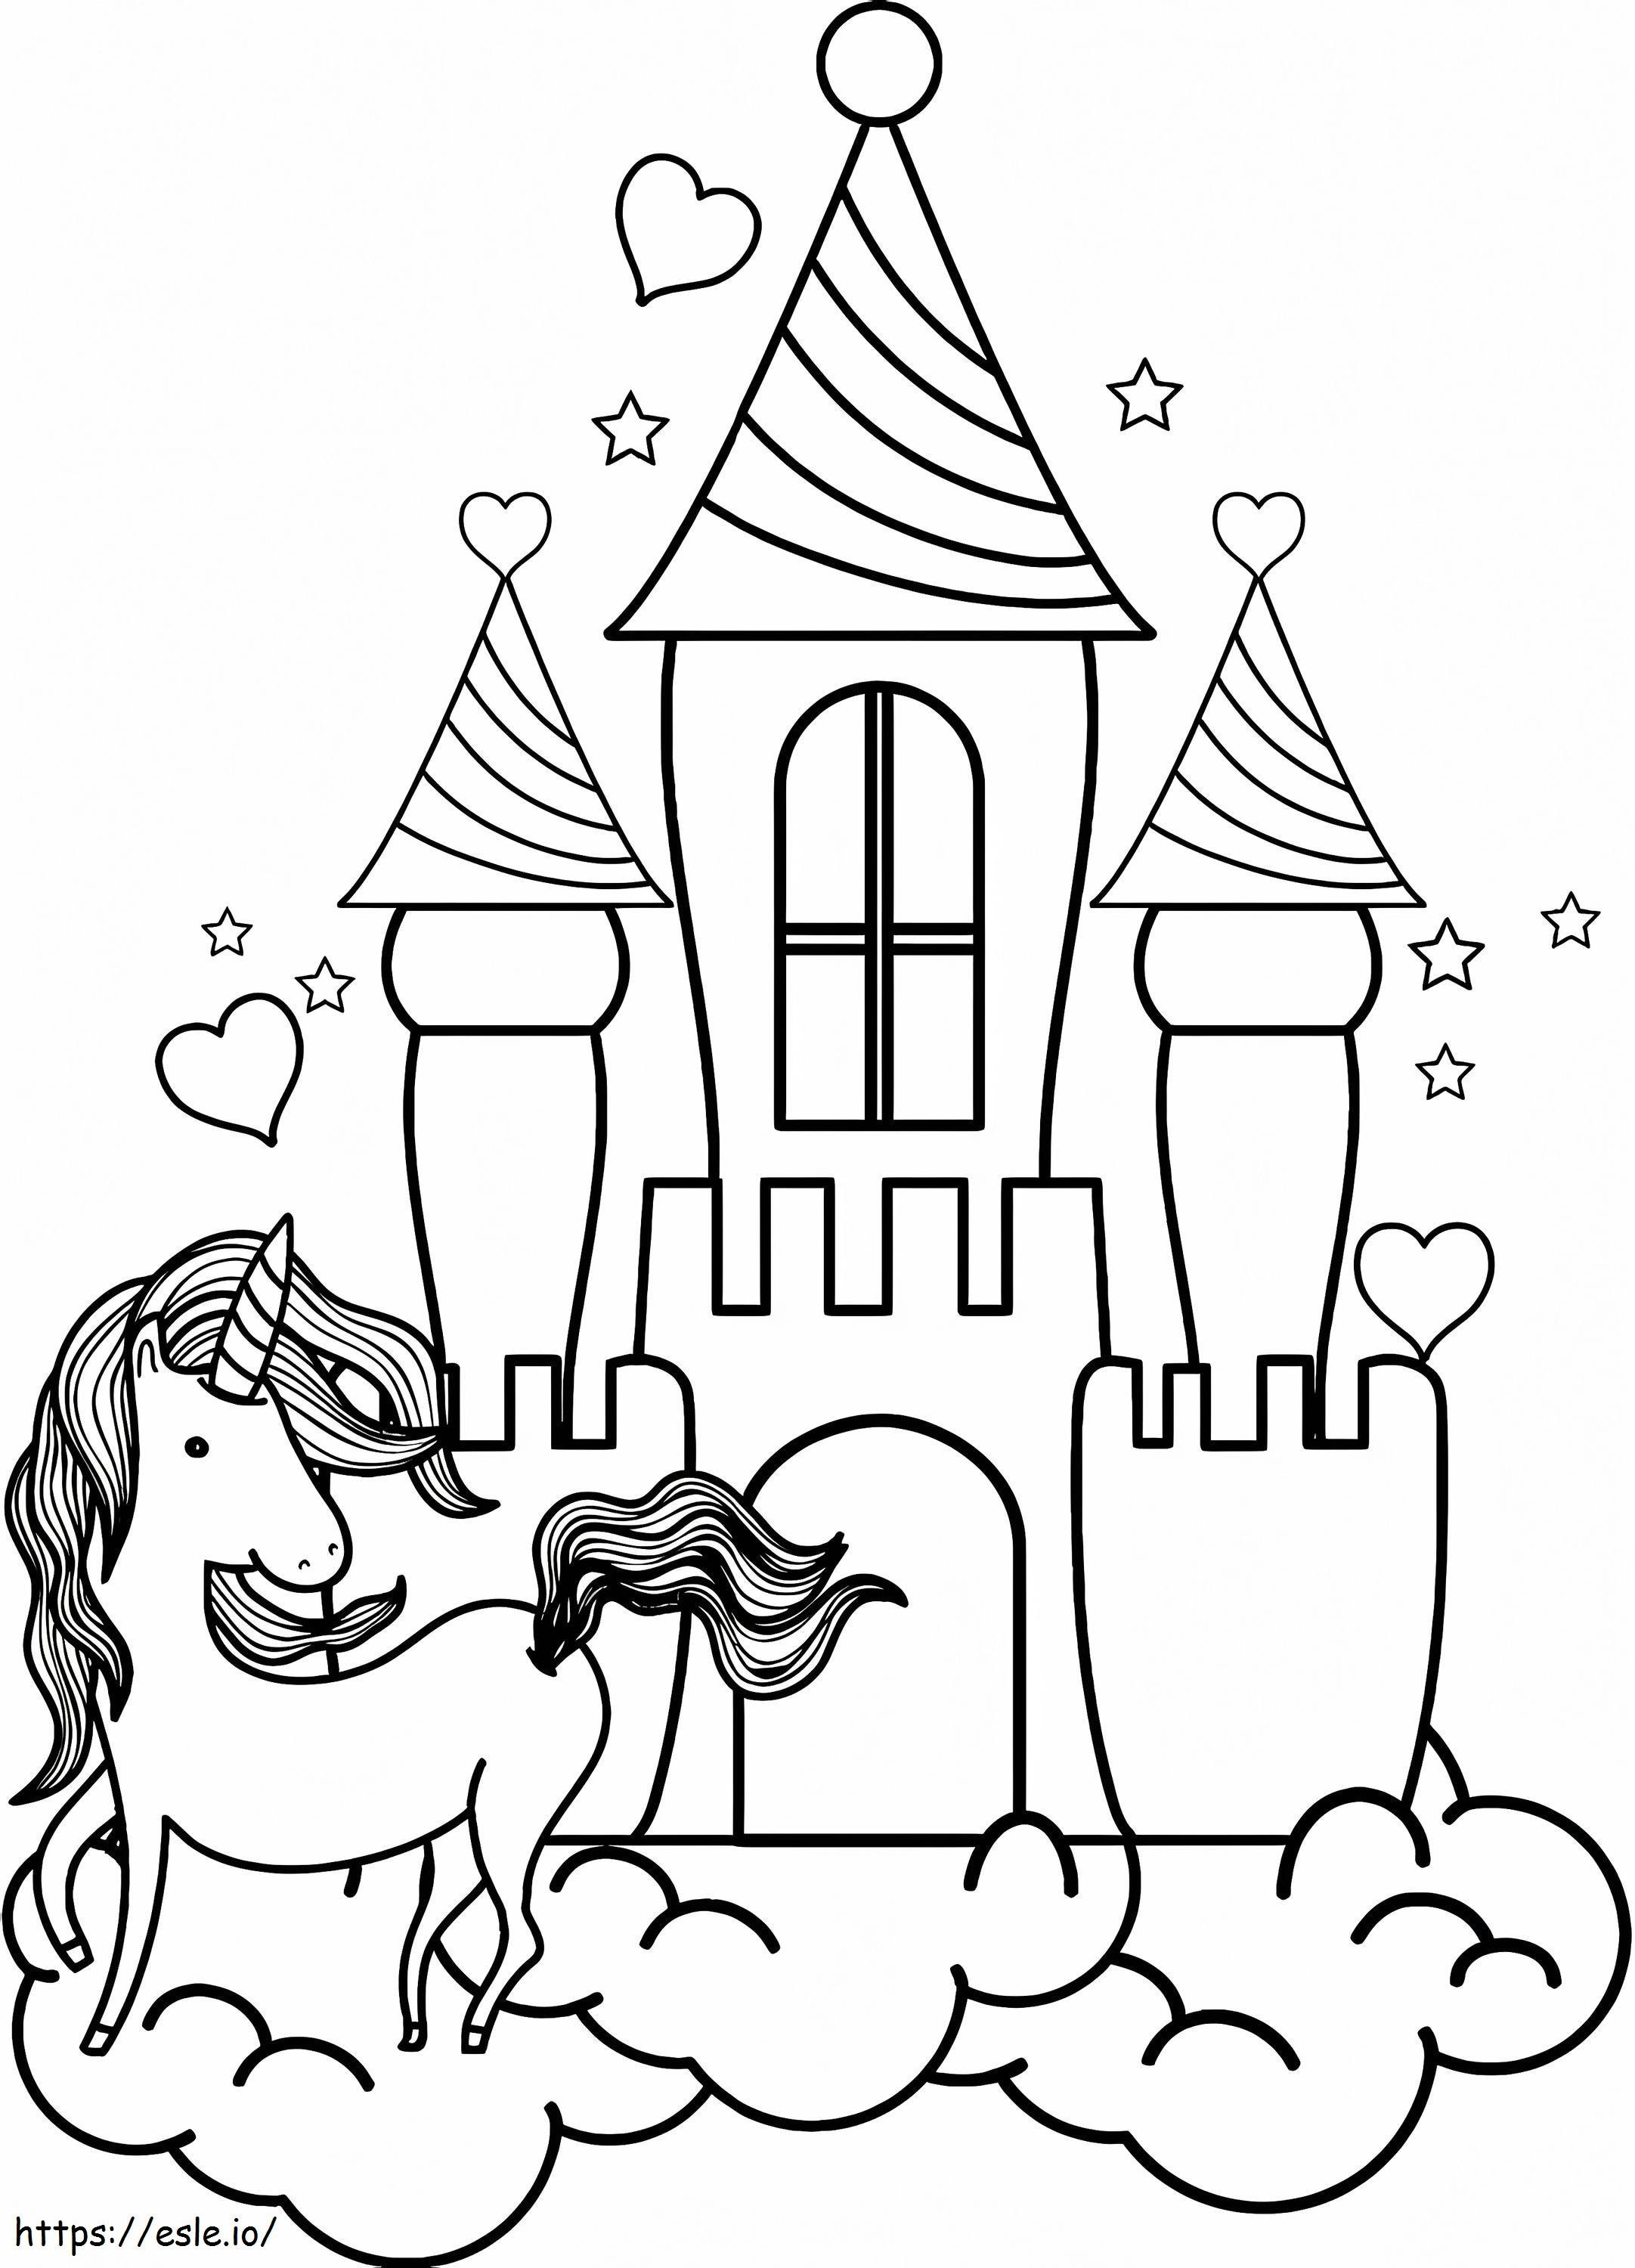 Castle And Unicorn coloring page